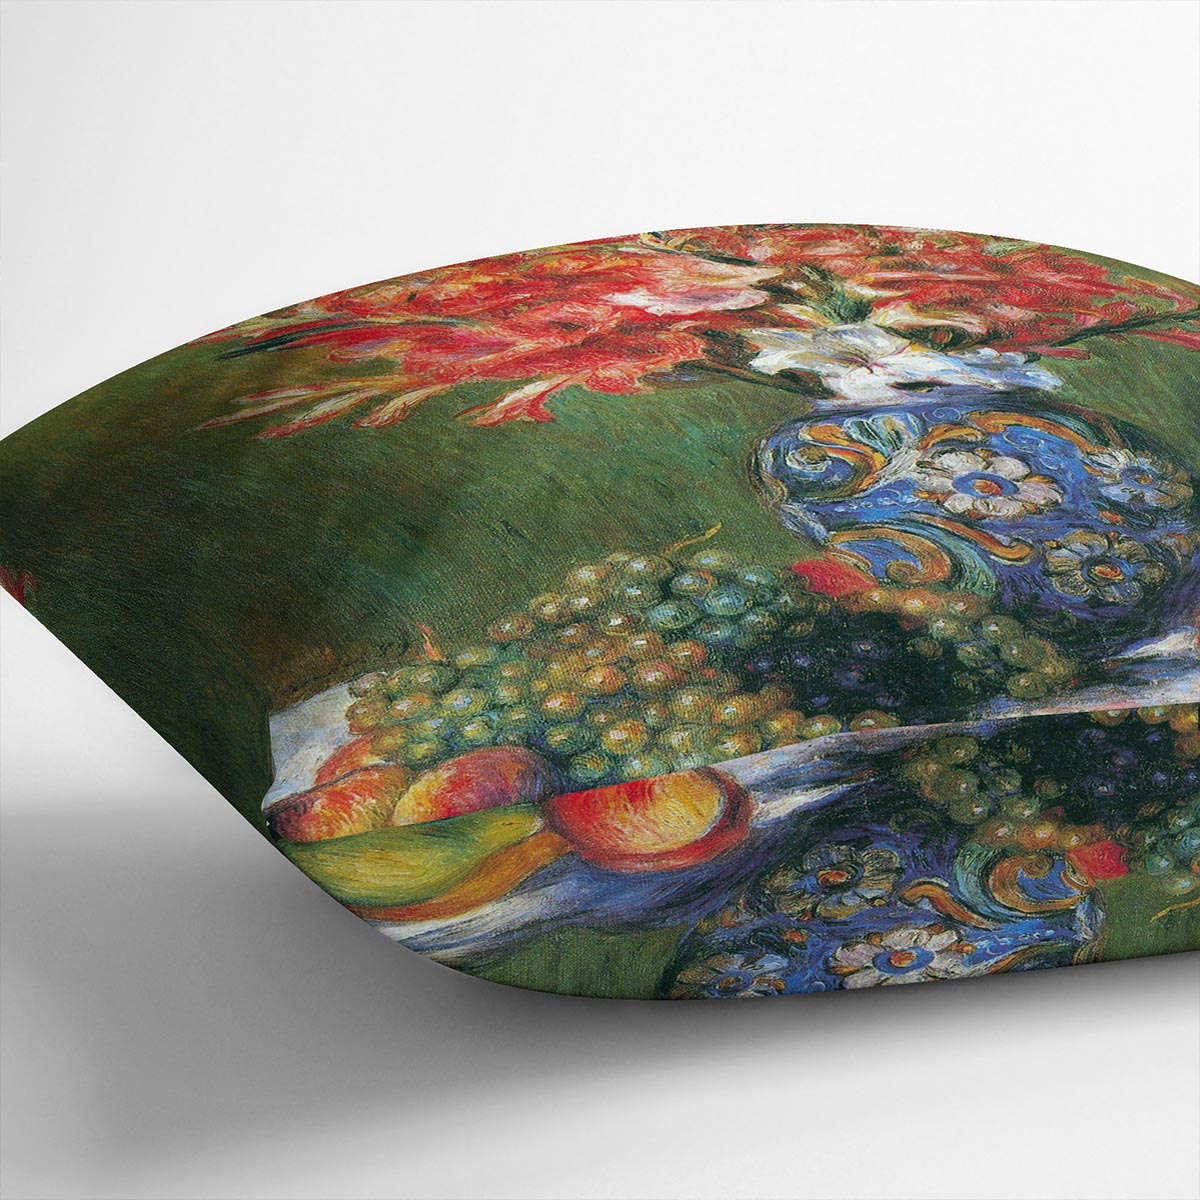 Flowers and Fruit by Renoir Cushion